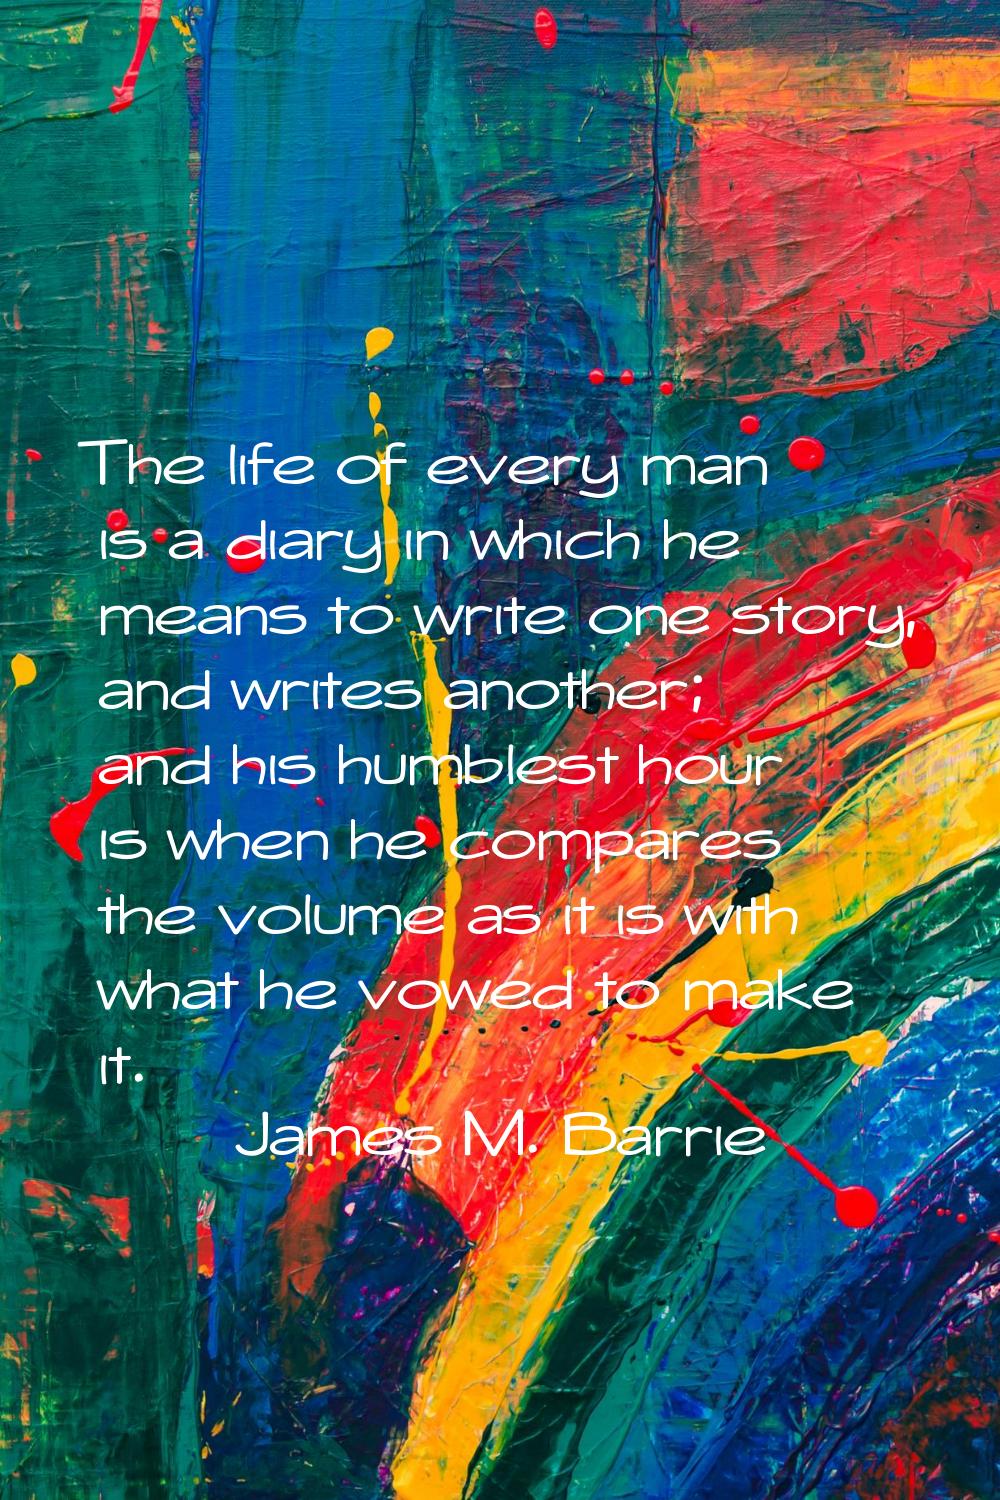 The life of every man is a diary in which he means to write one story, and writes another; and his 